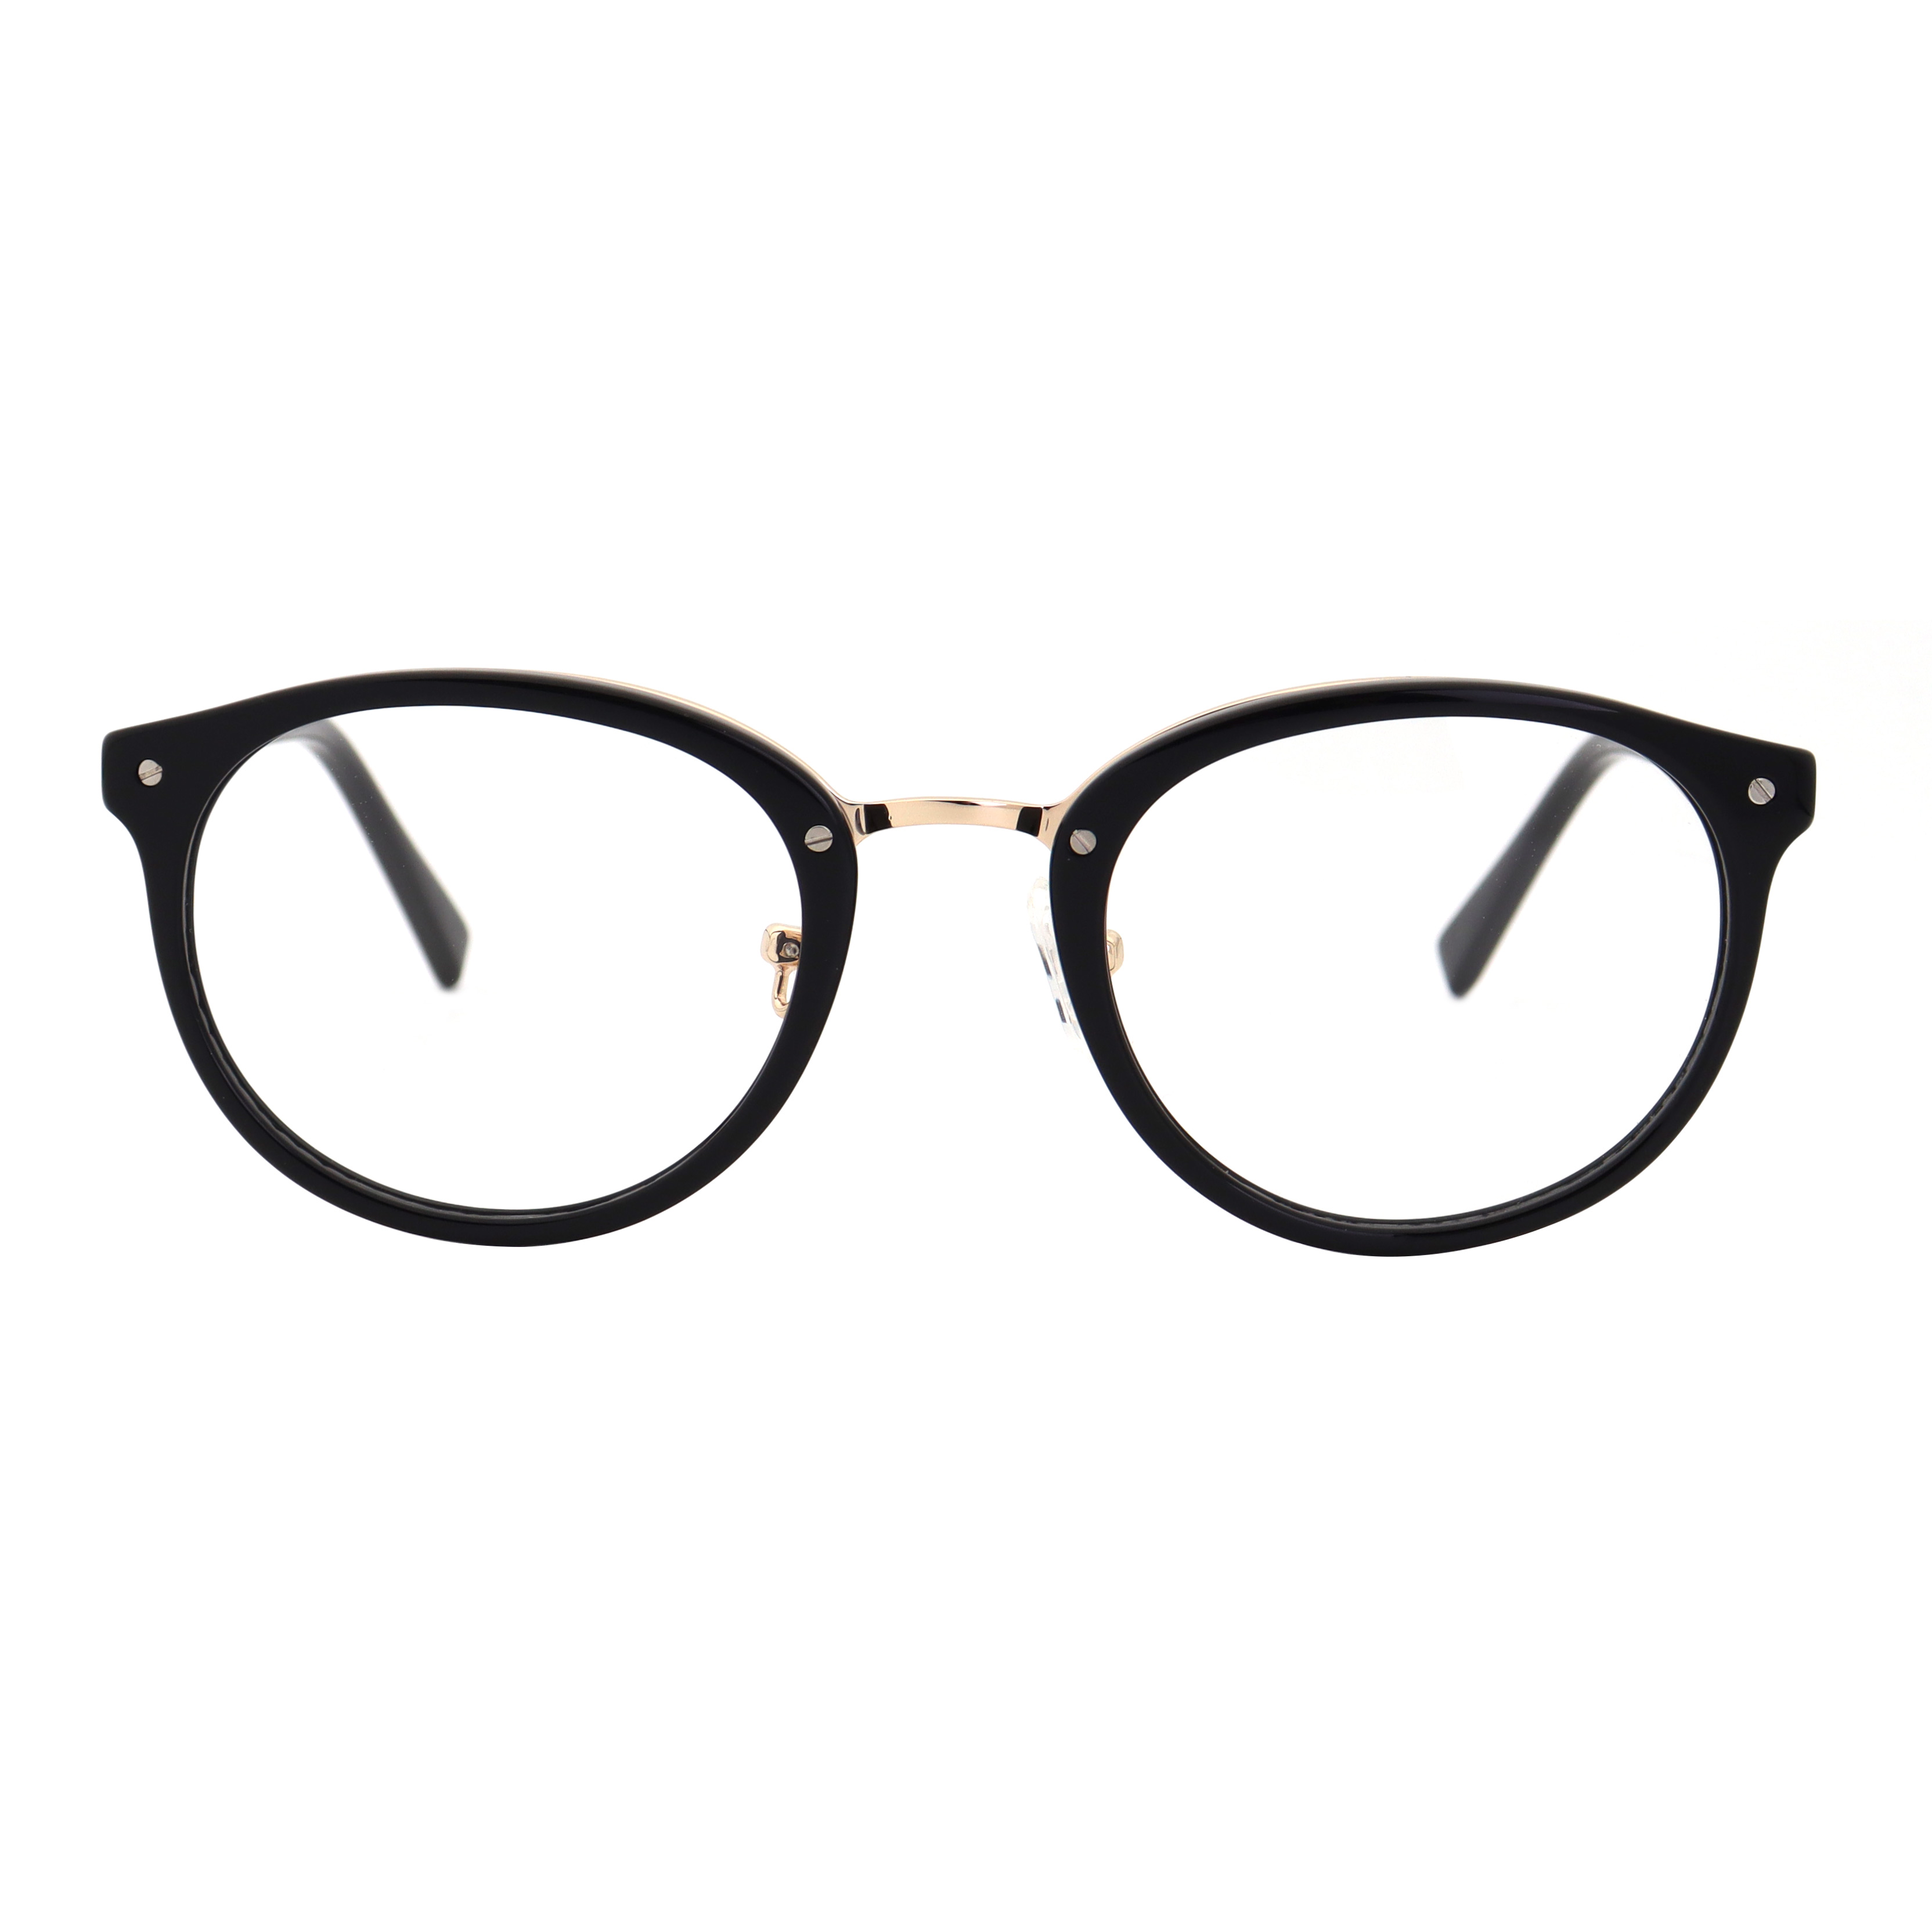 Fashionmixed material eyewear from classic style